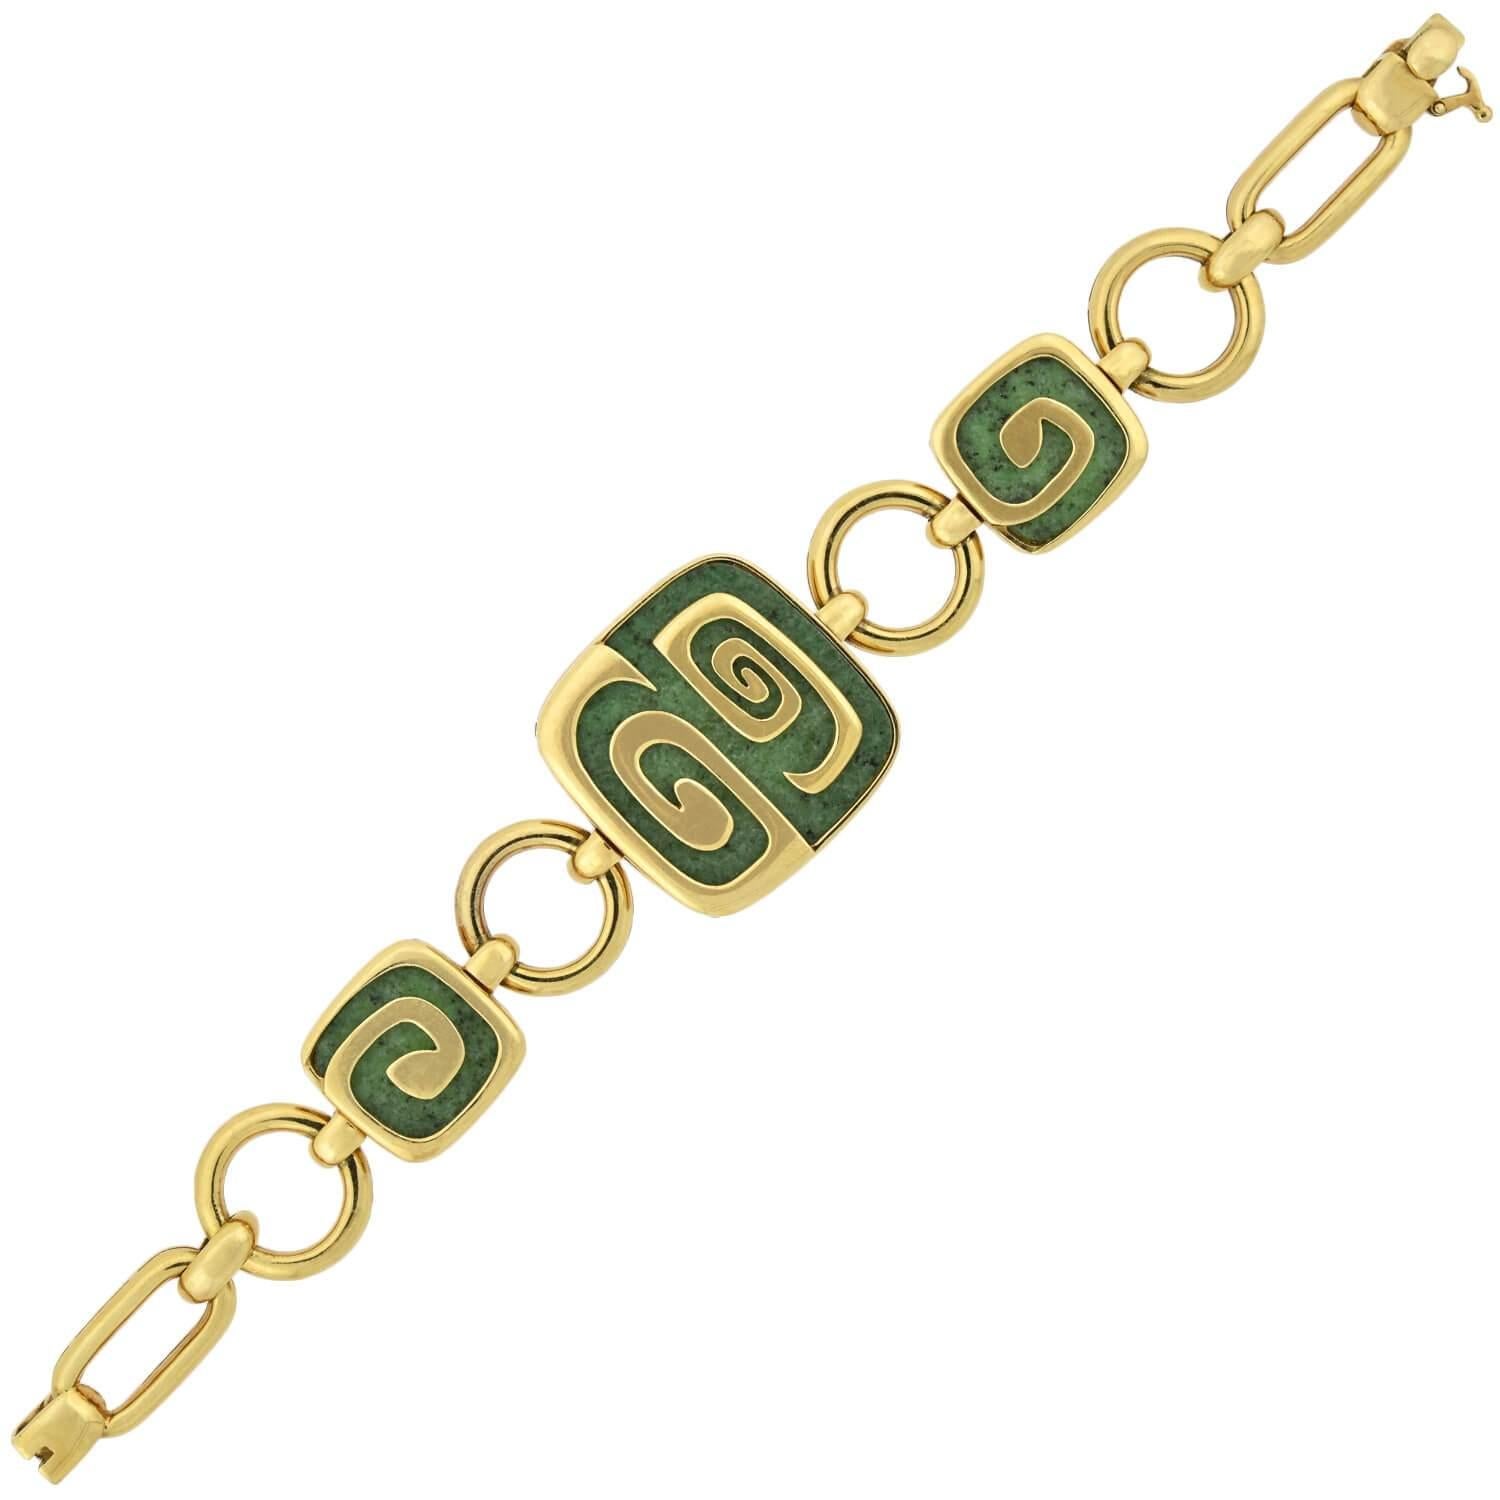 A fabulous Estate garnet link bracelet from the Bvlgari Theme Collection! This limited edition bracelet is crafted in 18kt yellow gold and adorns three gorgeous green hydrogrossular garnet links. The largest of the square shaped links rests at the